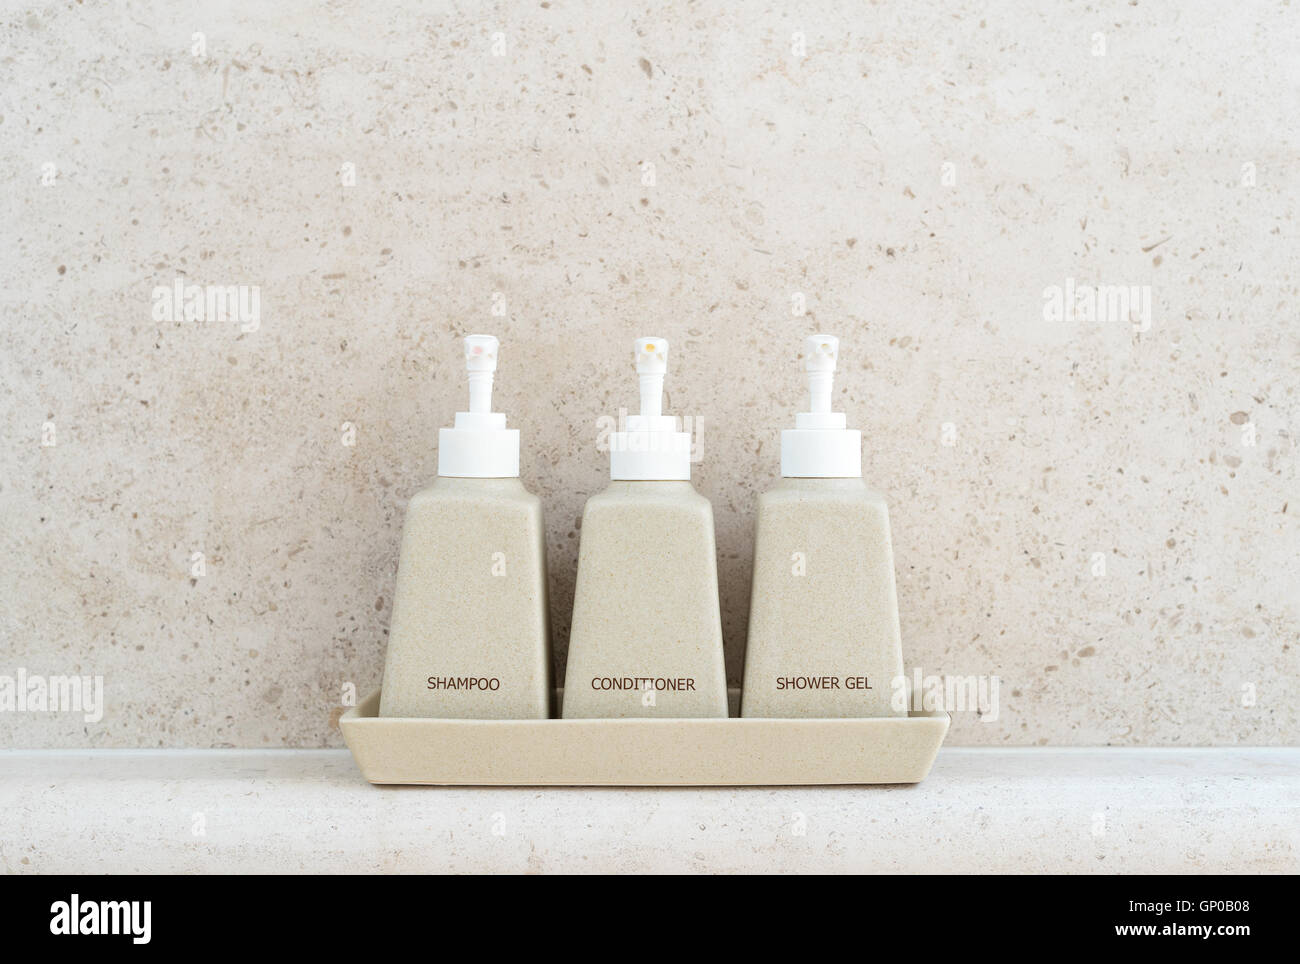 Toiletries tube in a luxury hotel, shower gel, shampoo and hair conditioner in ceramic ware. Copy space. Stock Photo